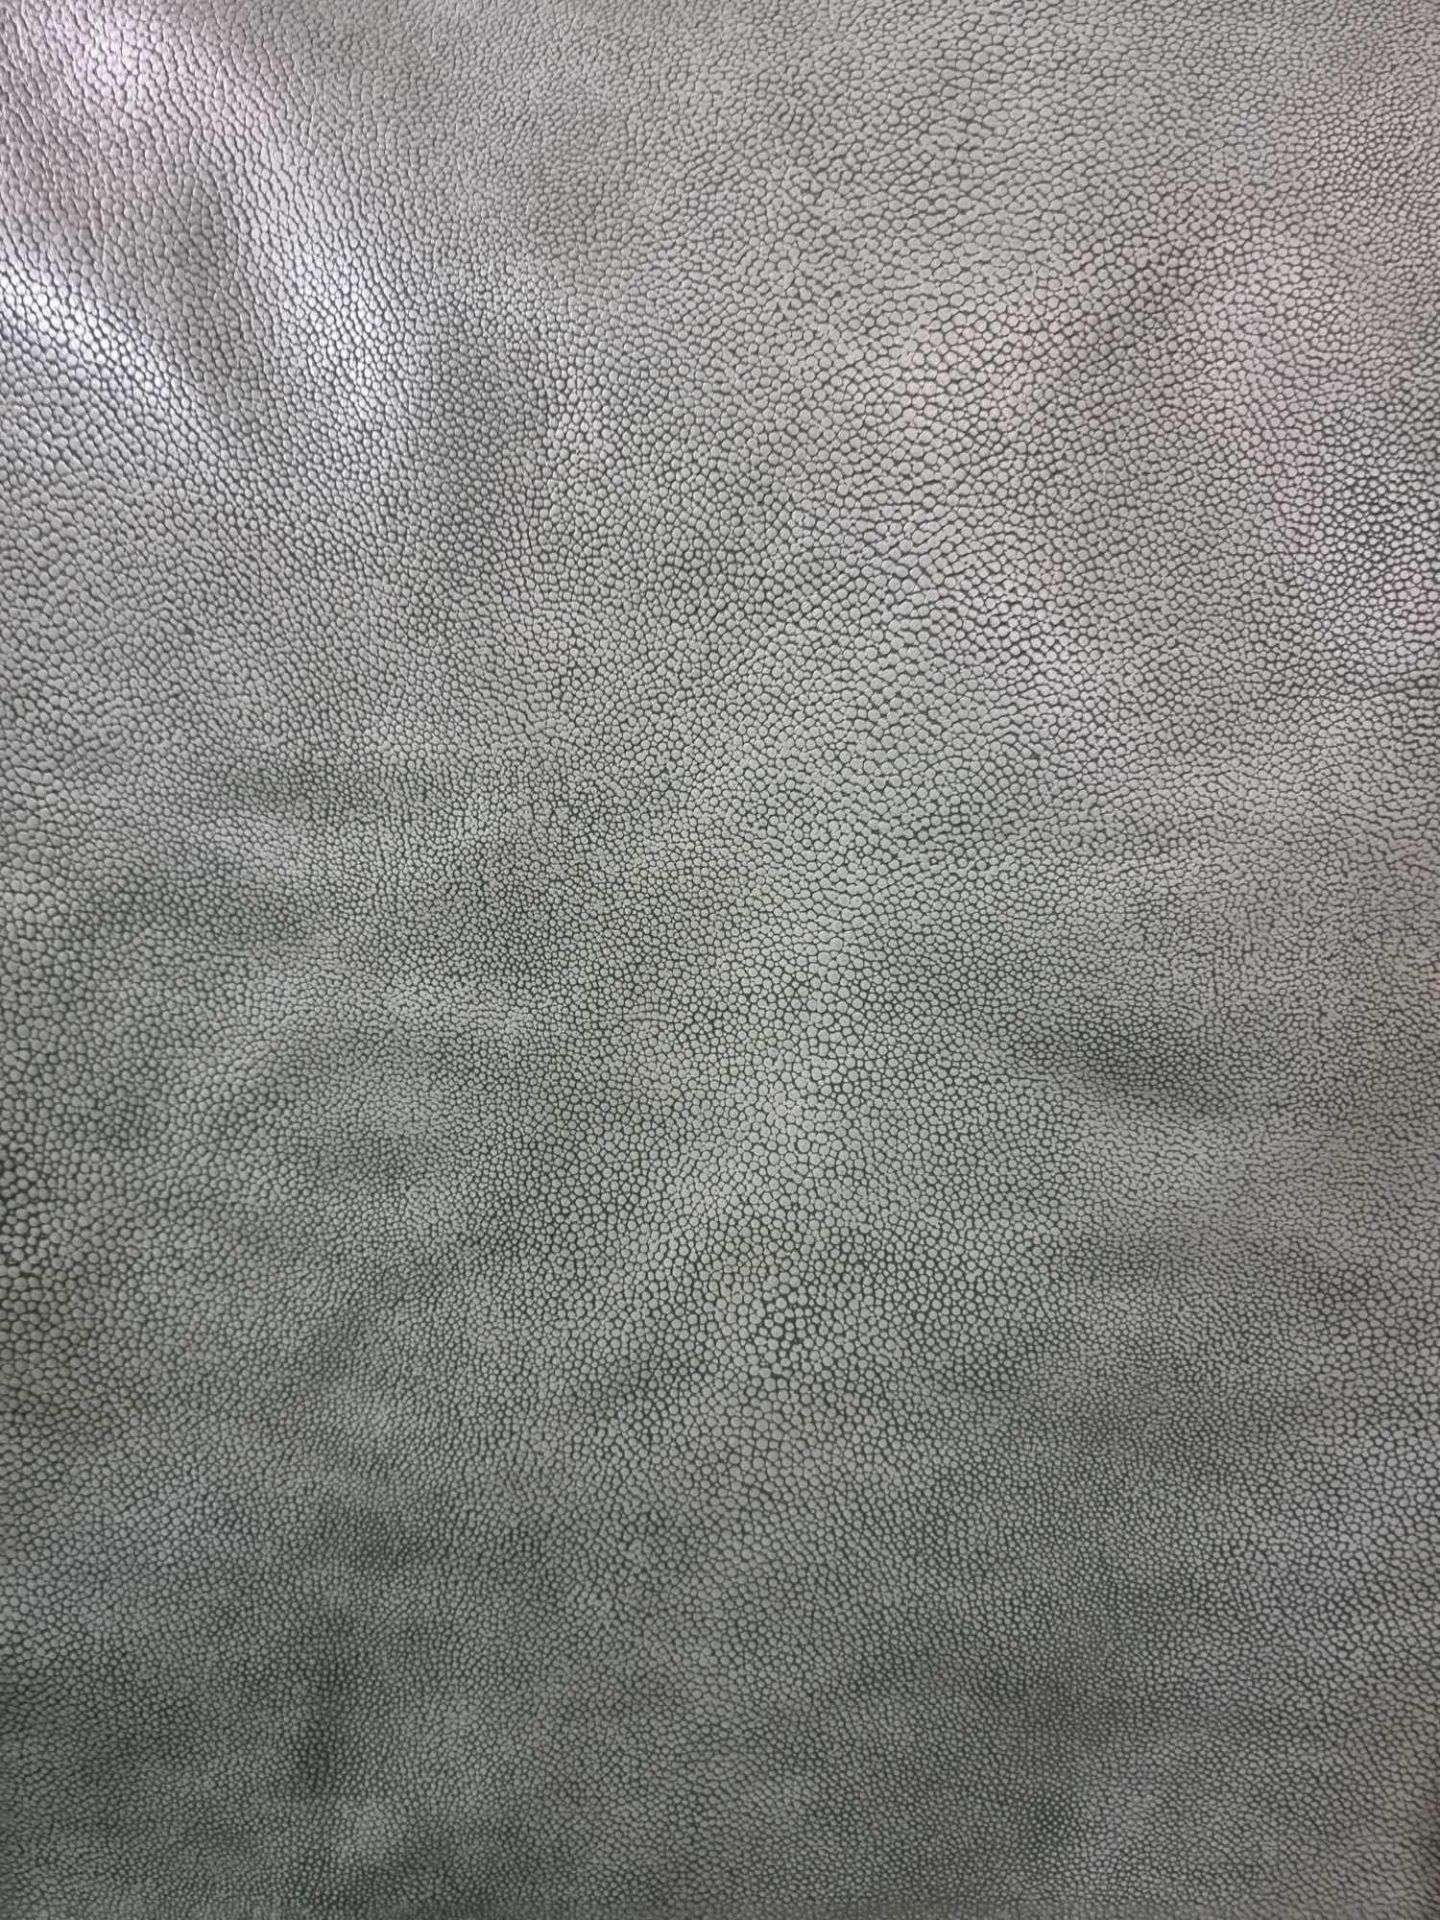 Sage Leather Hide approximately 3.6mÂ² 2 x 1.8cm - Image 2 of 3